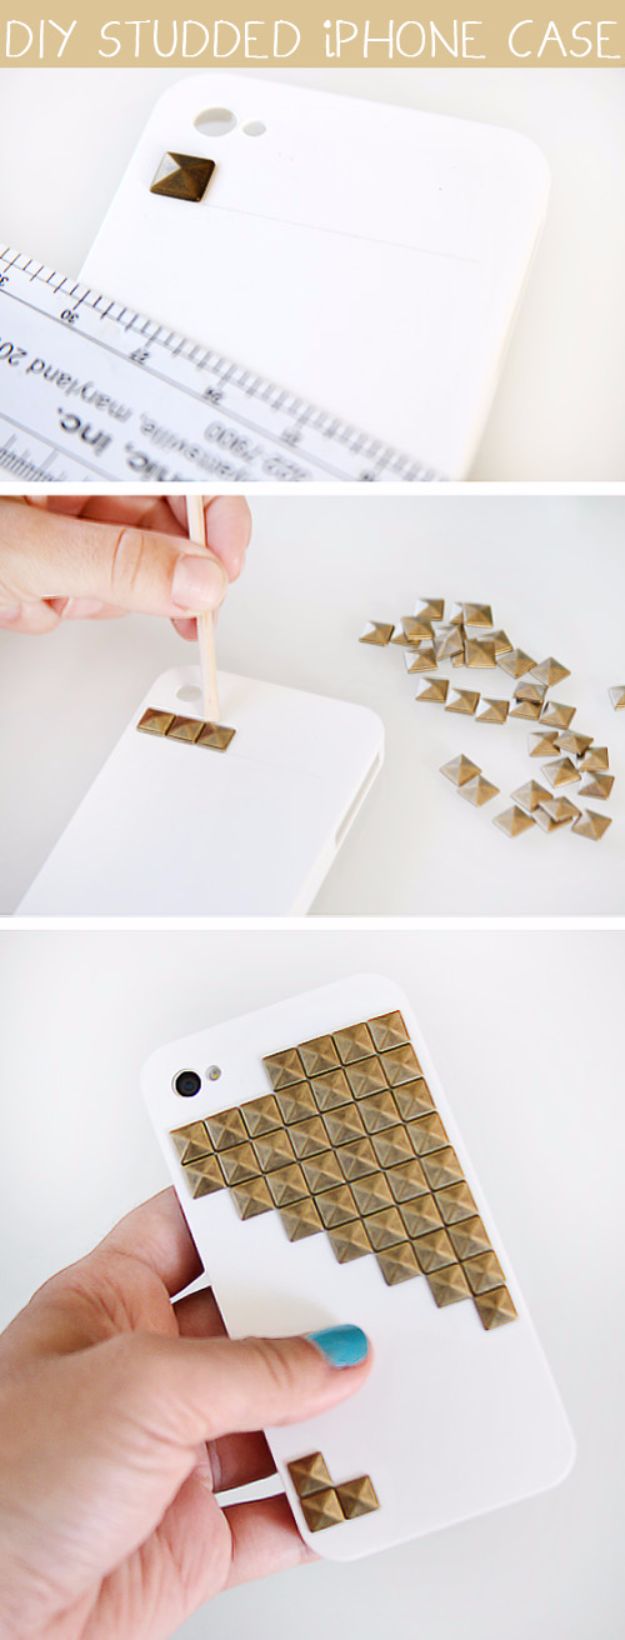 Crafts for Teens to Make and Sell - DIY Studded Iphone Case - Cheap and Easy DIY Ideas To Make For Extra Money - Best Things to Sell On Etsy, Dollar Store Craft Ideas, Quick Projects for Teenagers To Make Spending Cash - DIY Gifts, Wall Art, School Supplies, Room Decor, Jewelry, Fashion, Hair Accessories, Bracelets, Magnets #teencrafts #craftstosell #etsyideass